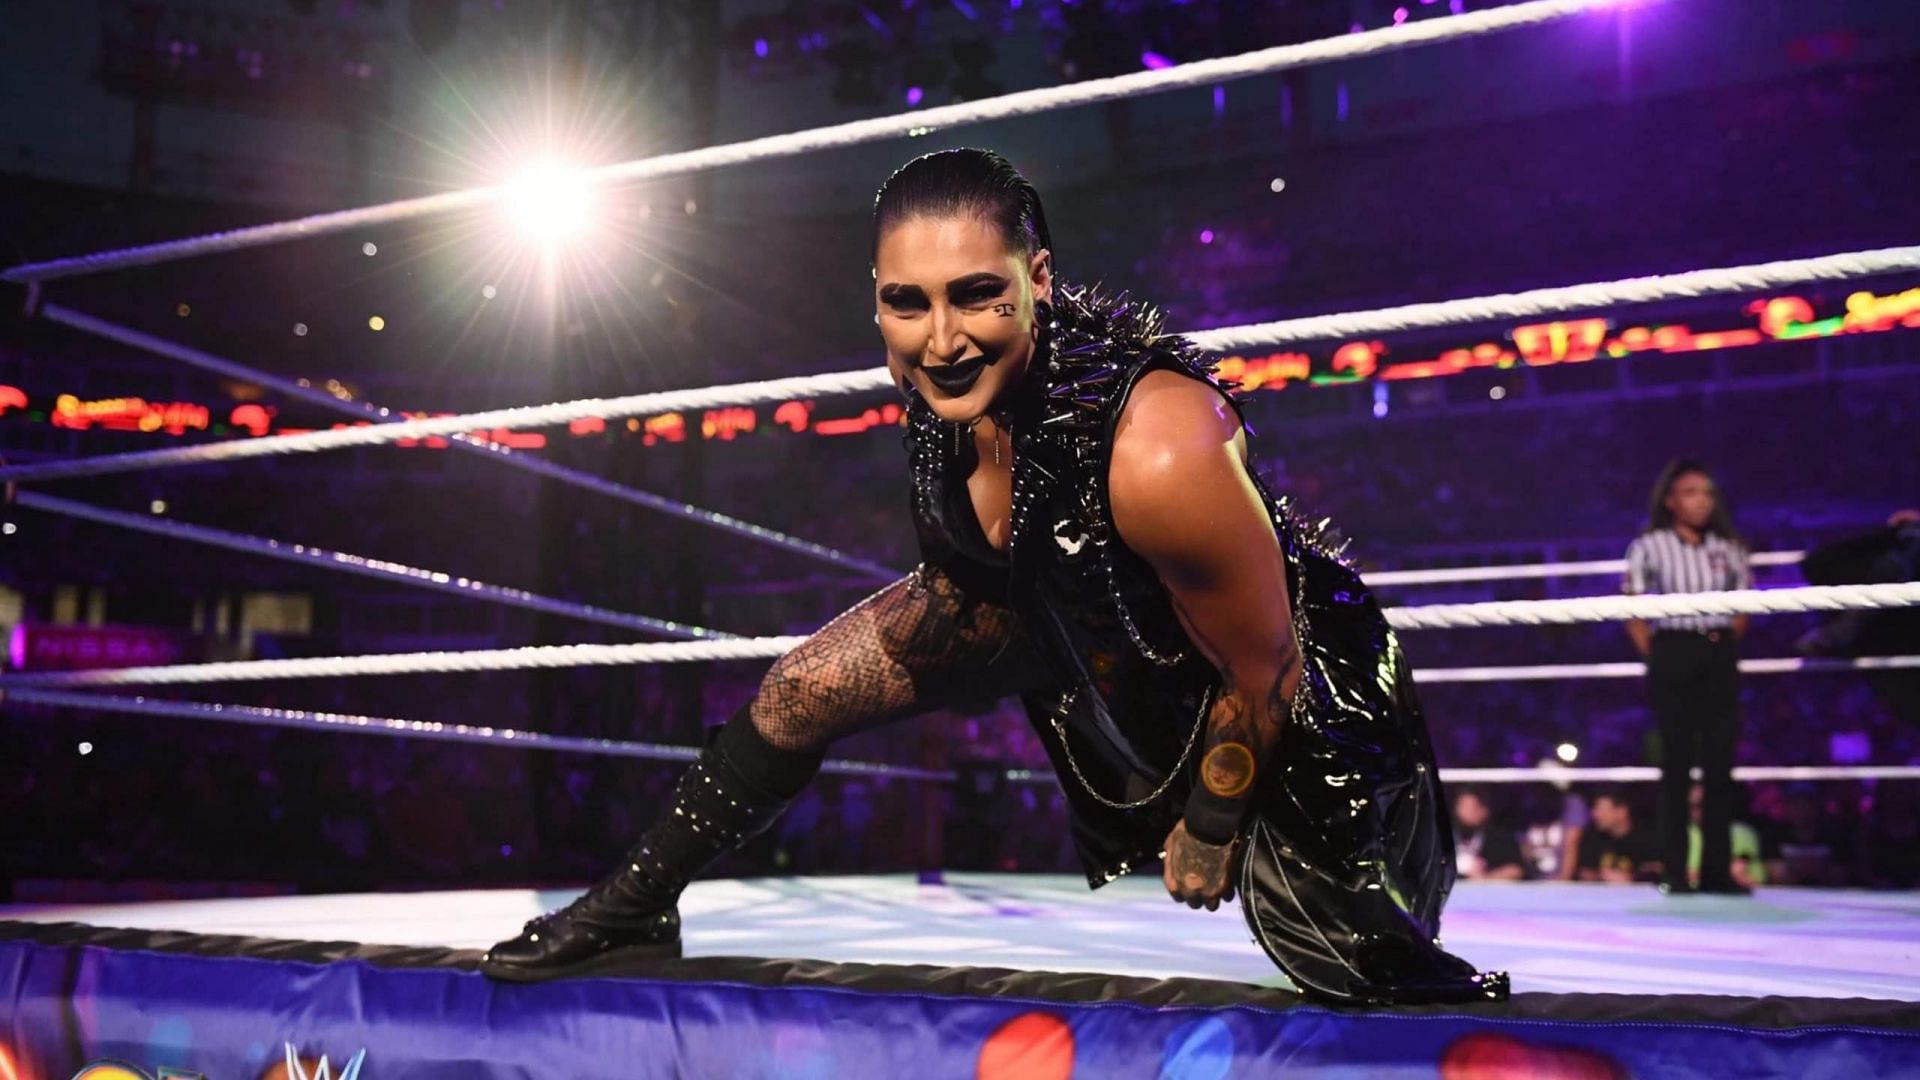 WWE Star Rhea Ripley reportedly set for major push in 2023